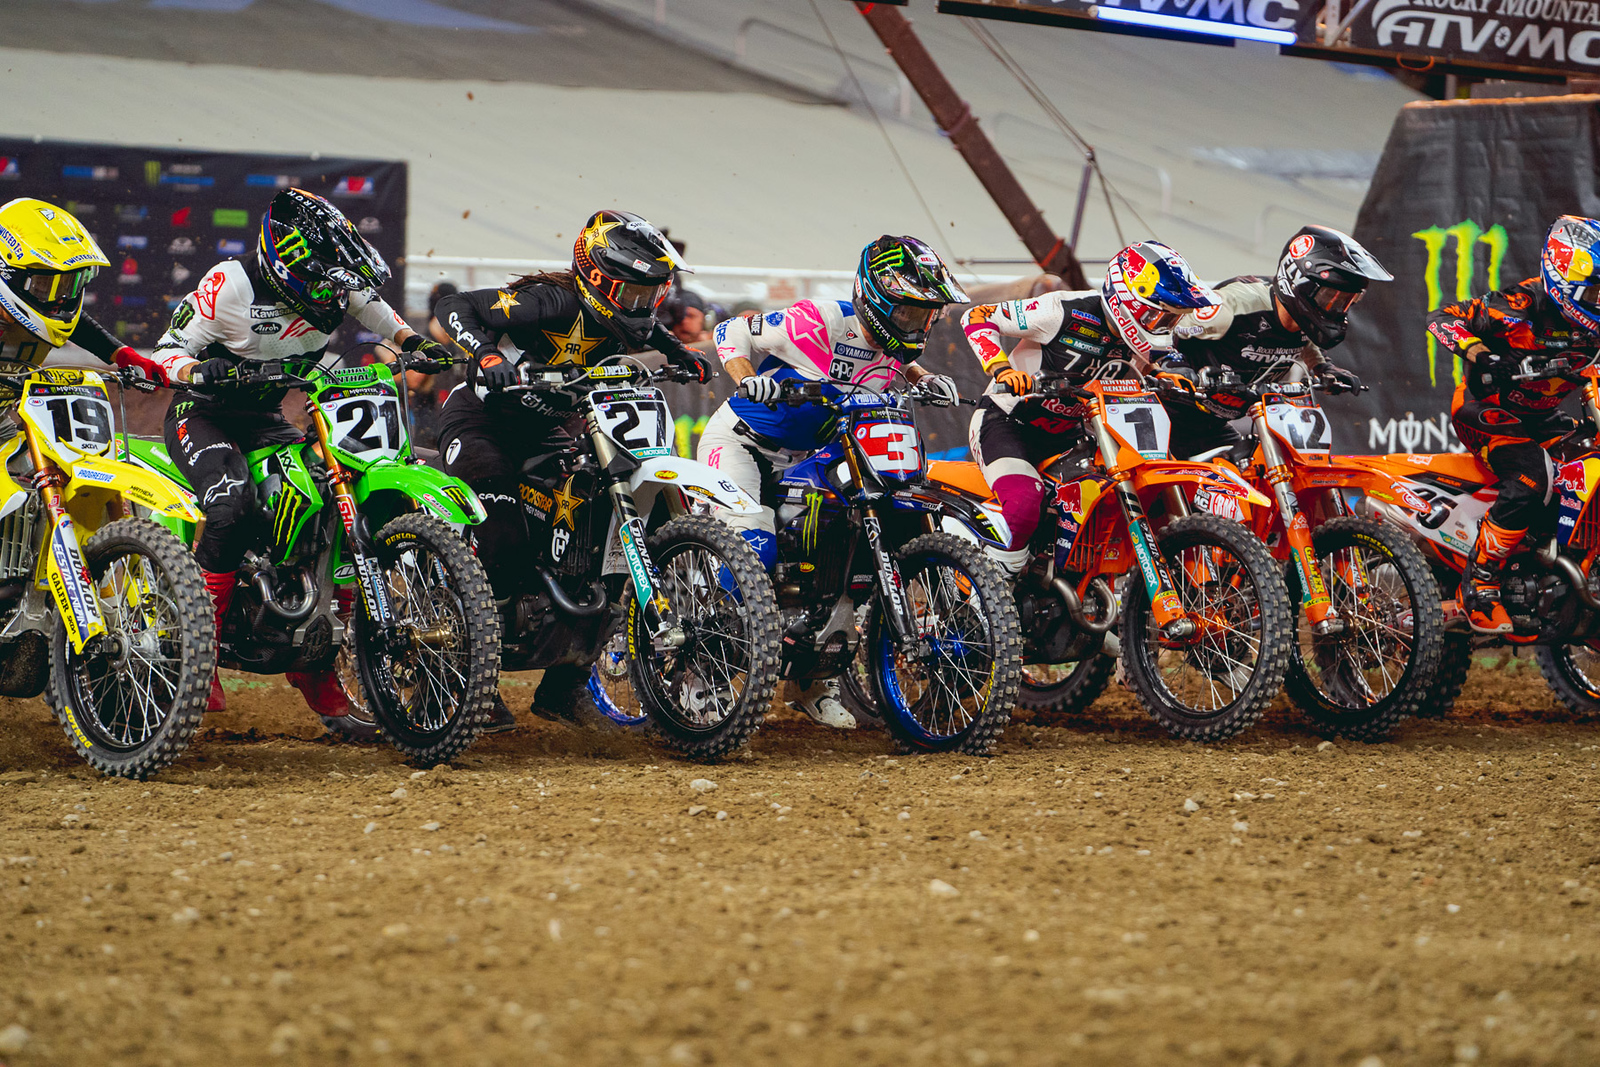 2023 AMA Supercross, Motocross and SuperMotocross Schedules